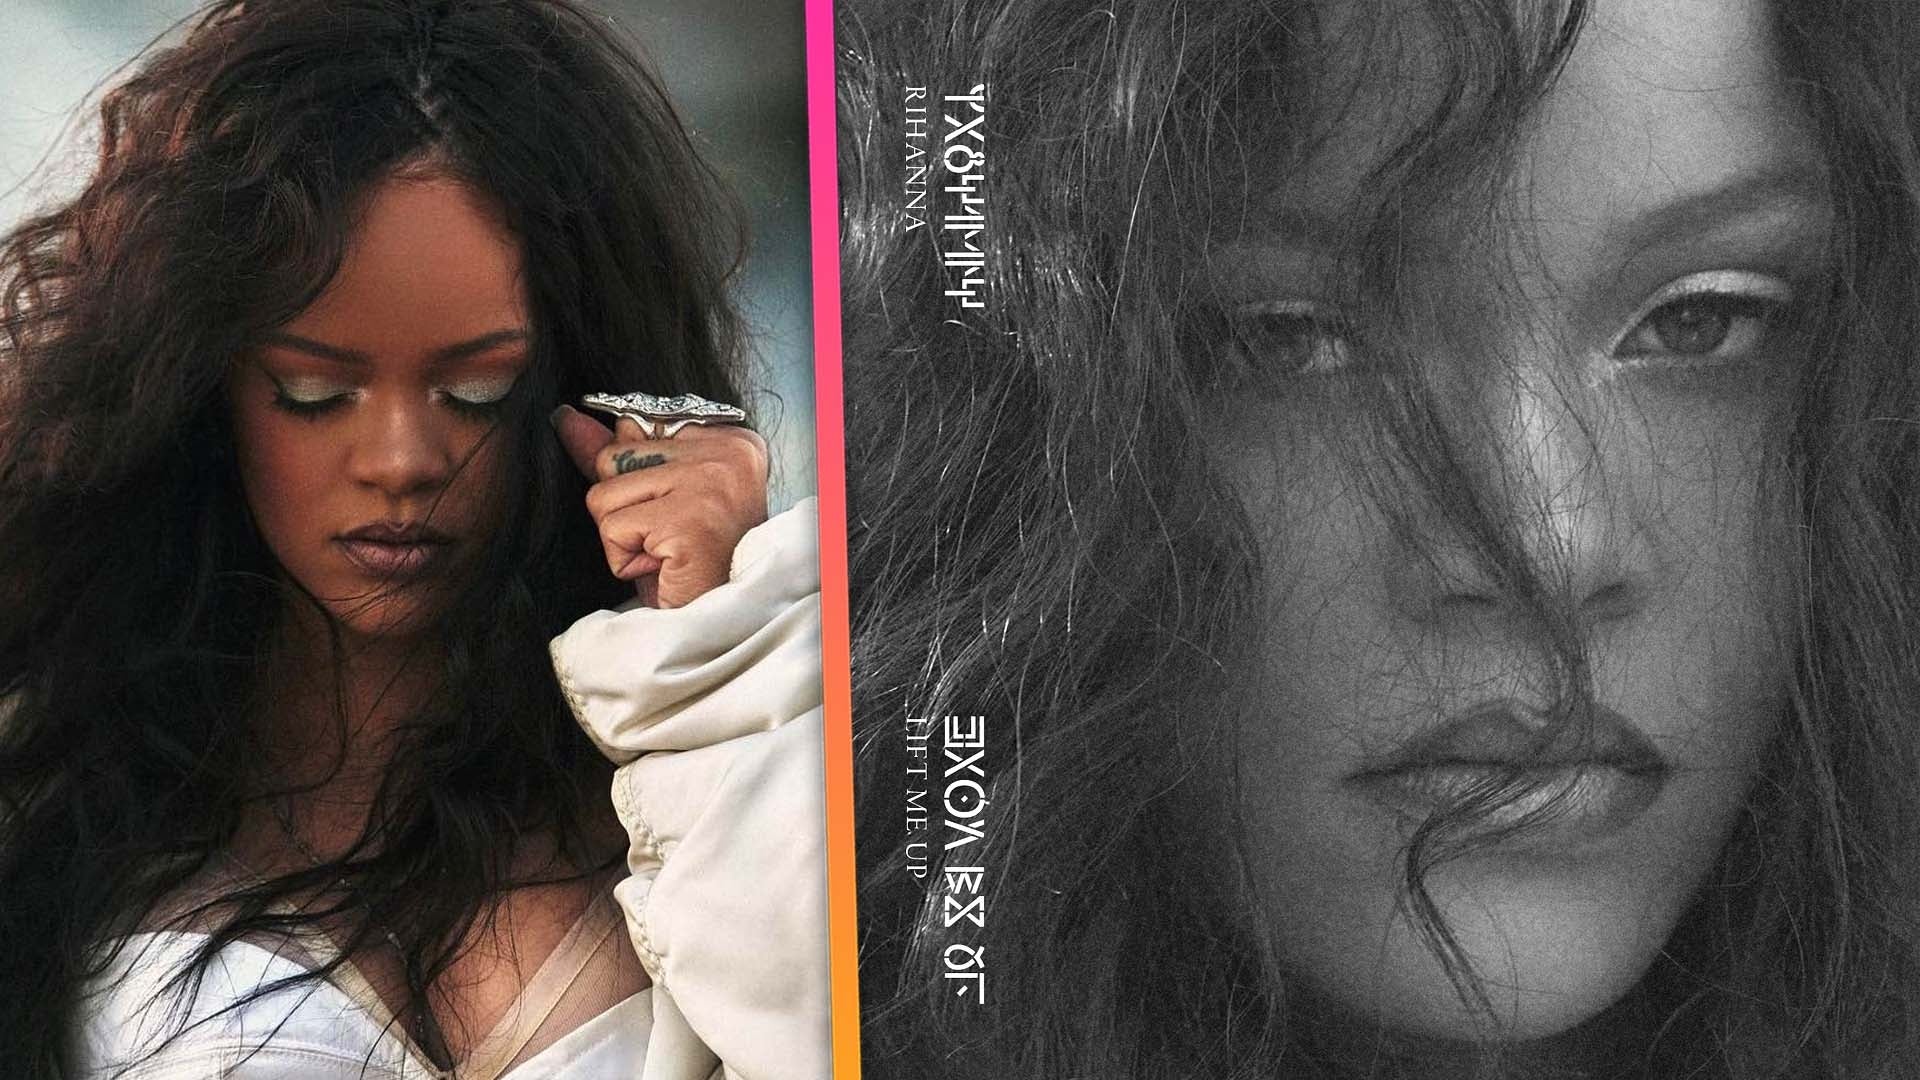 Rihanna Releases Moving Single 'Lift Me Up,' Her First Song in 6 Years 